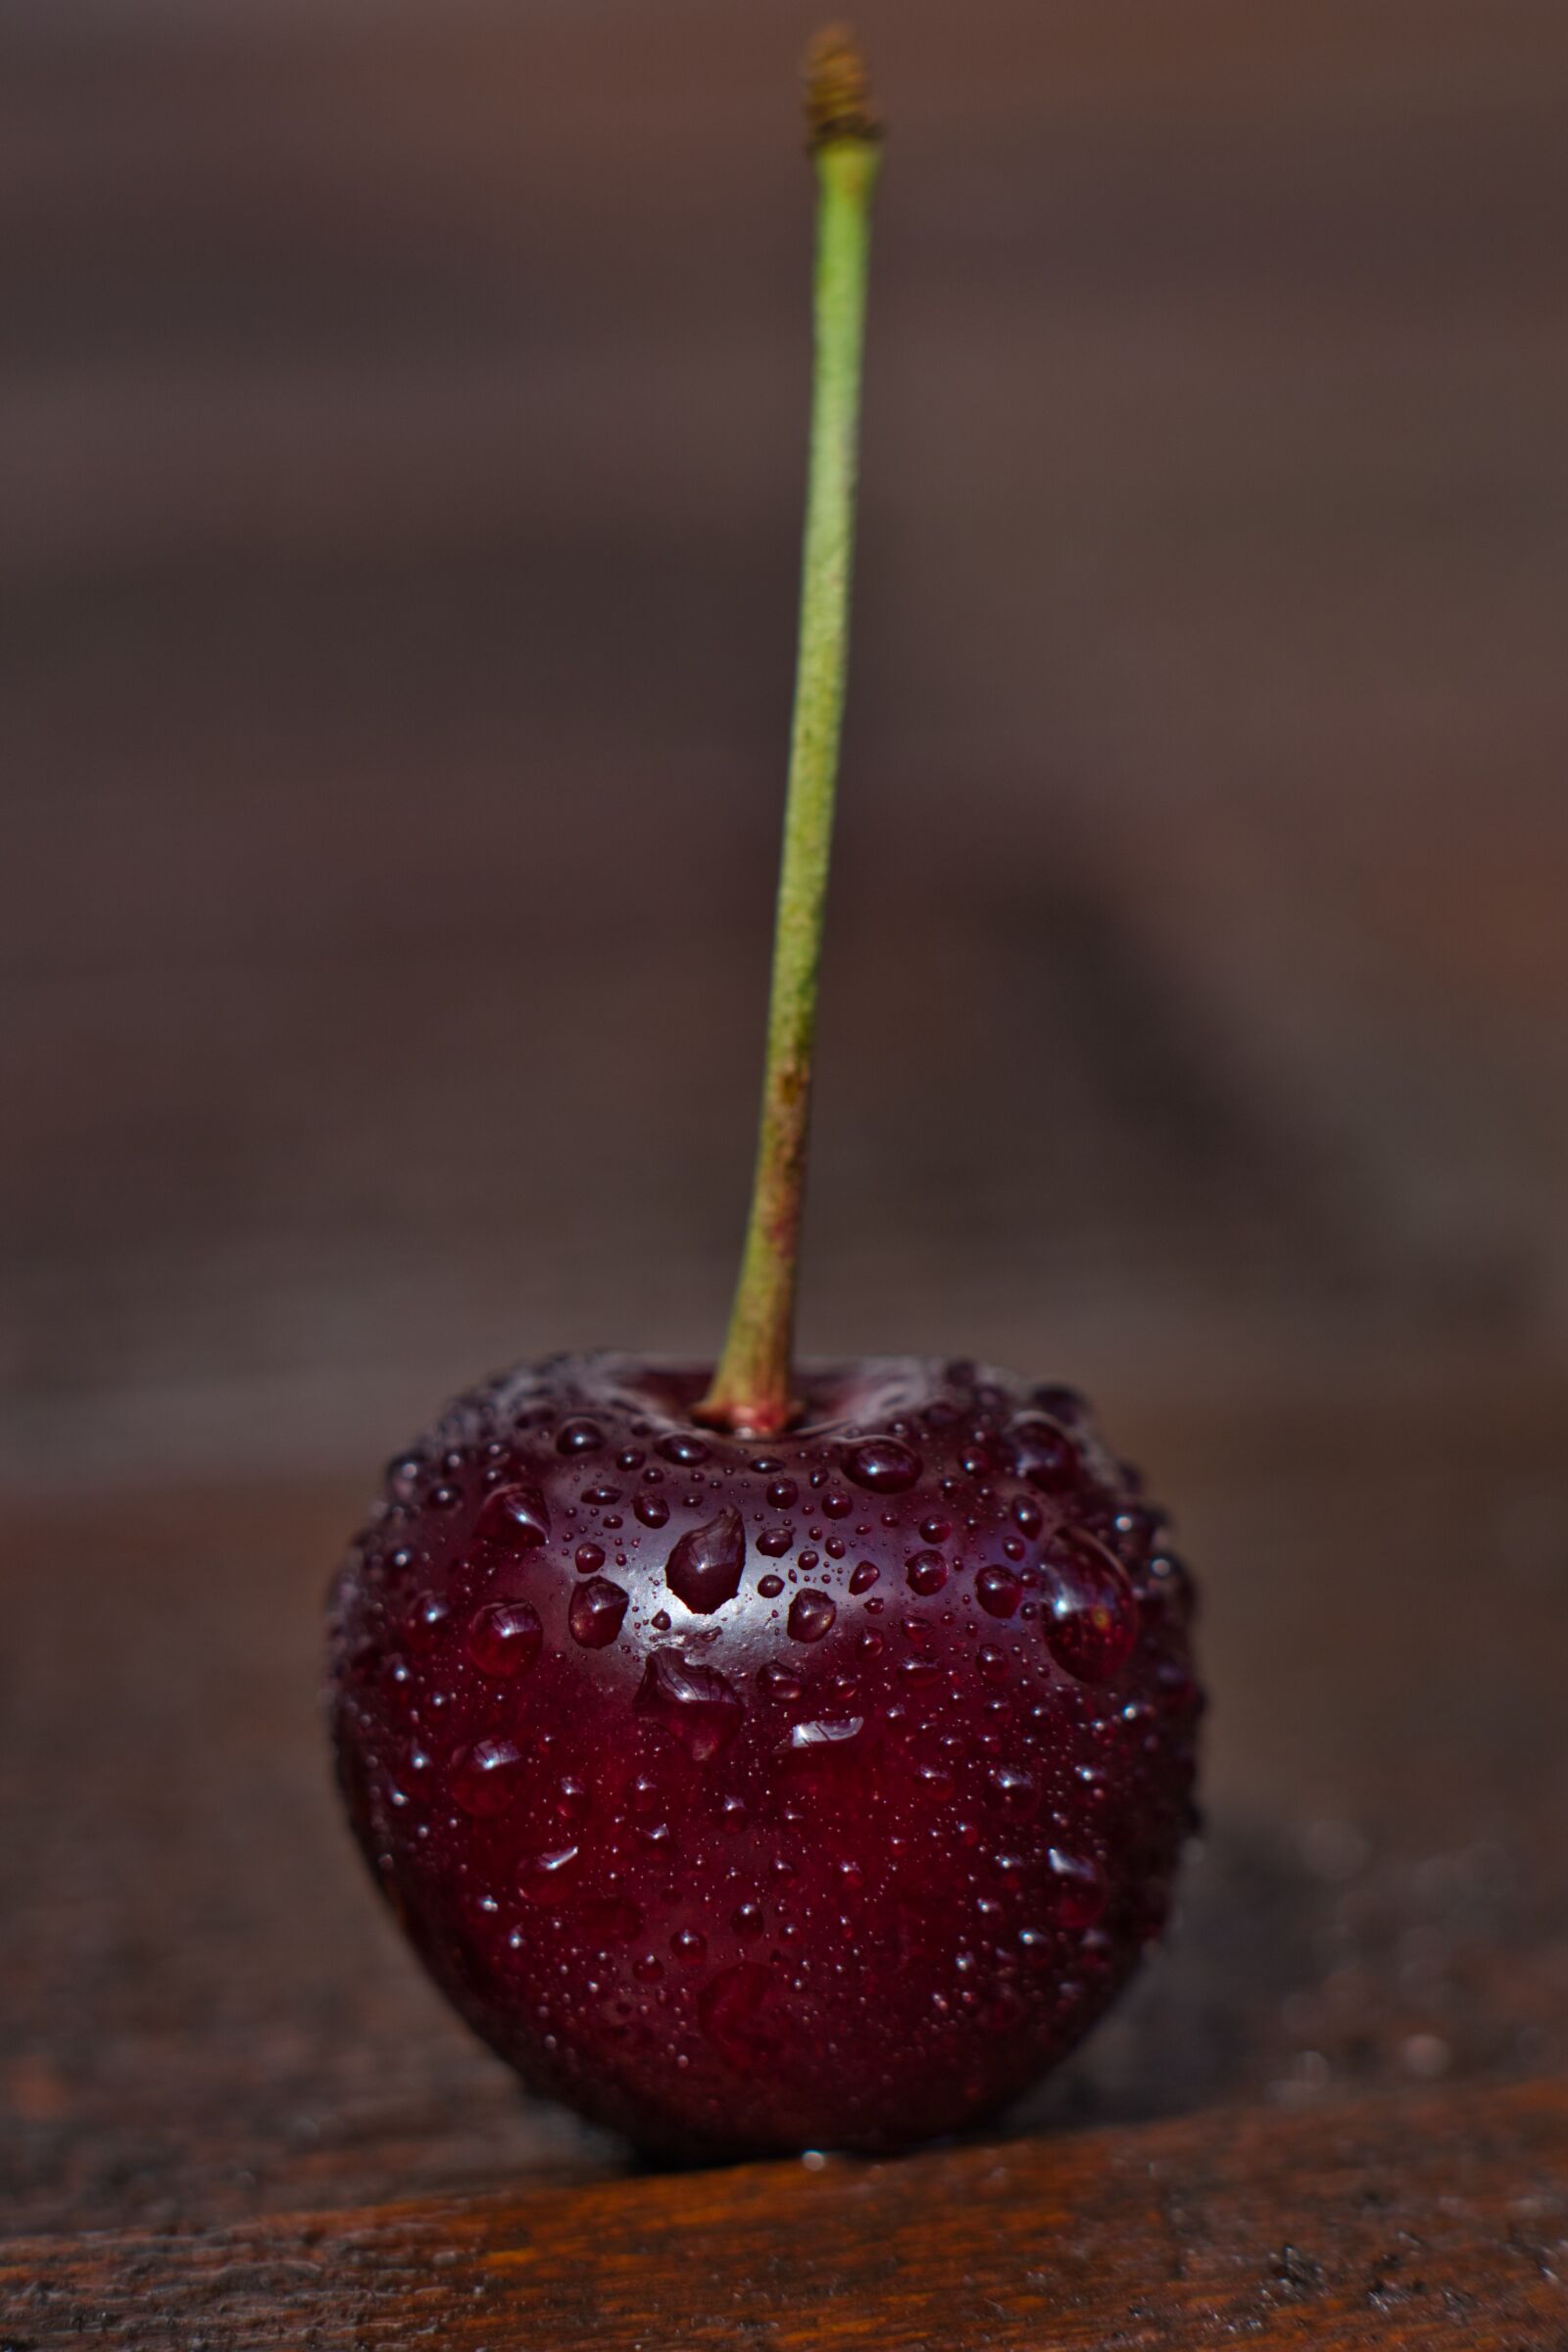 Sony a6400 + E 50mm F1.8 OSS sample photo. Cherry, fruit, self-picked photography